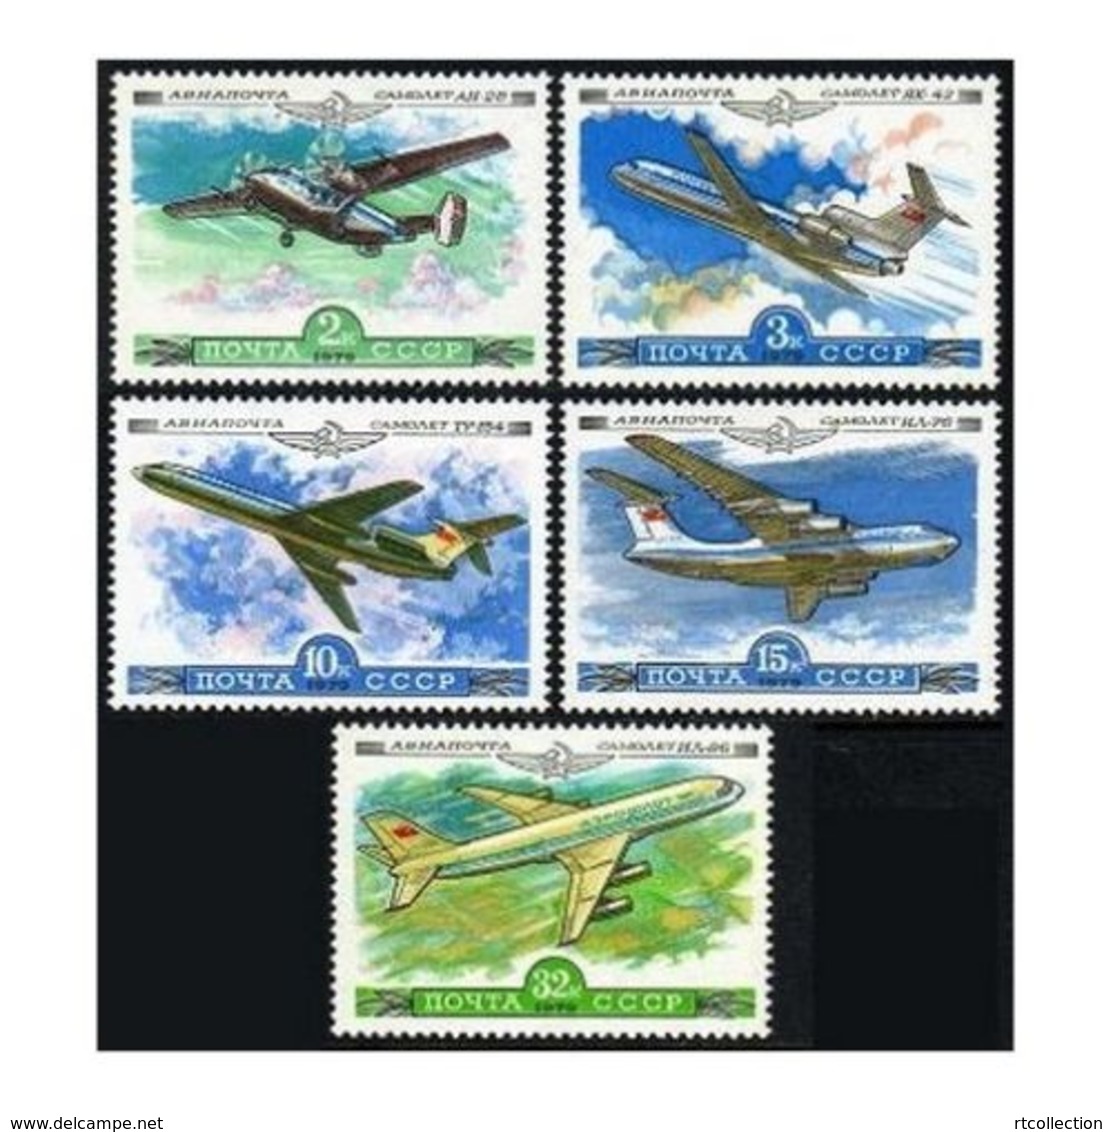 USSR Russia 1979 History Russian Aircraft Airplanes Aviation Transport Airplane Planes Stamps MNH Michel 4843-46 4912 - Unused Stamps